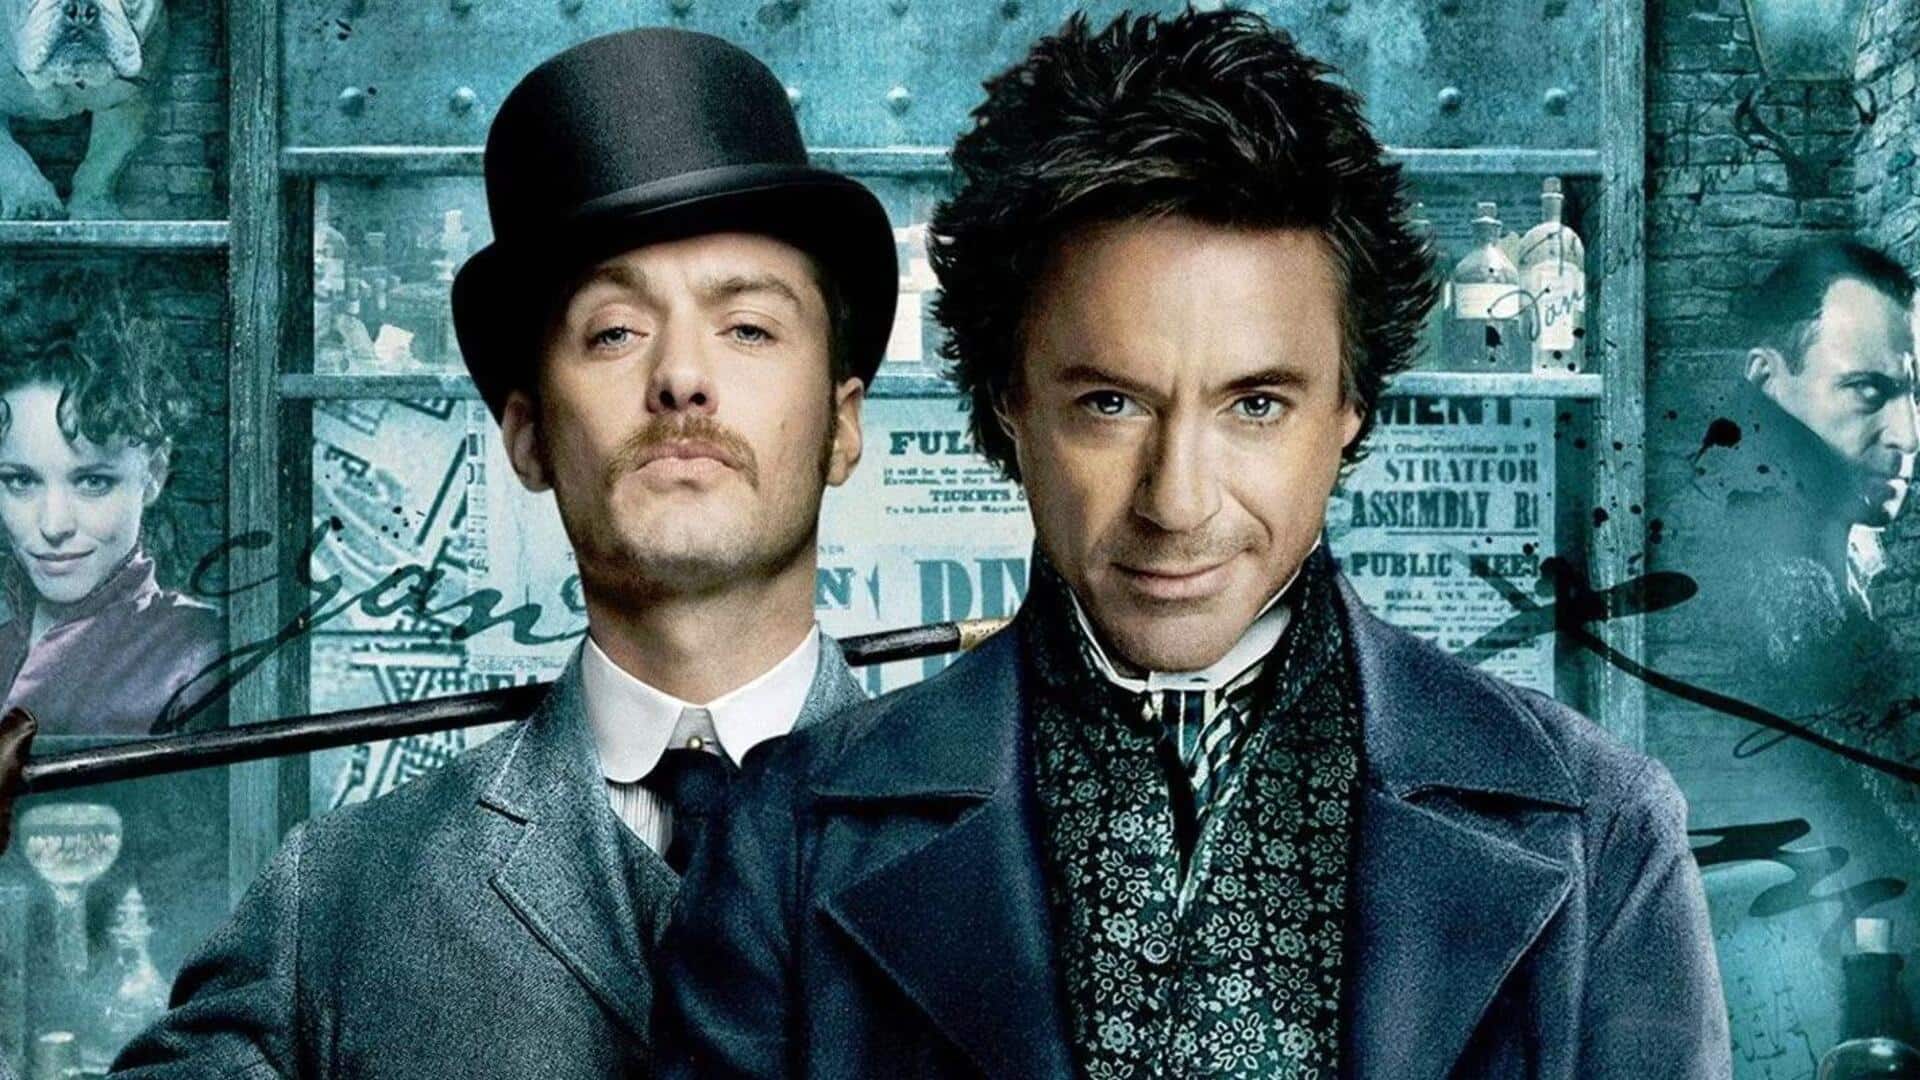 'Very much alive': Susan Downey on 'Sherlock Holmes 3'